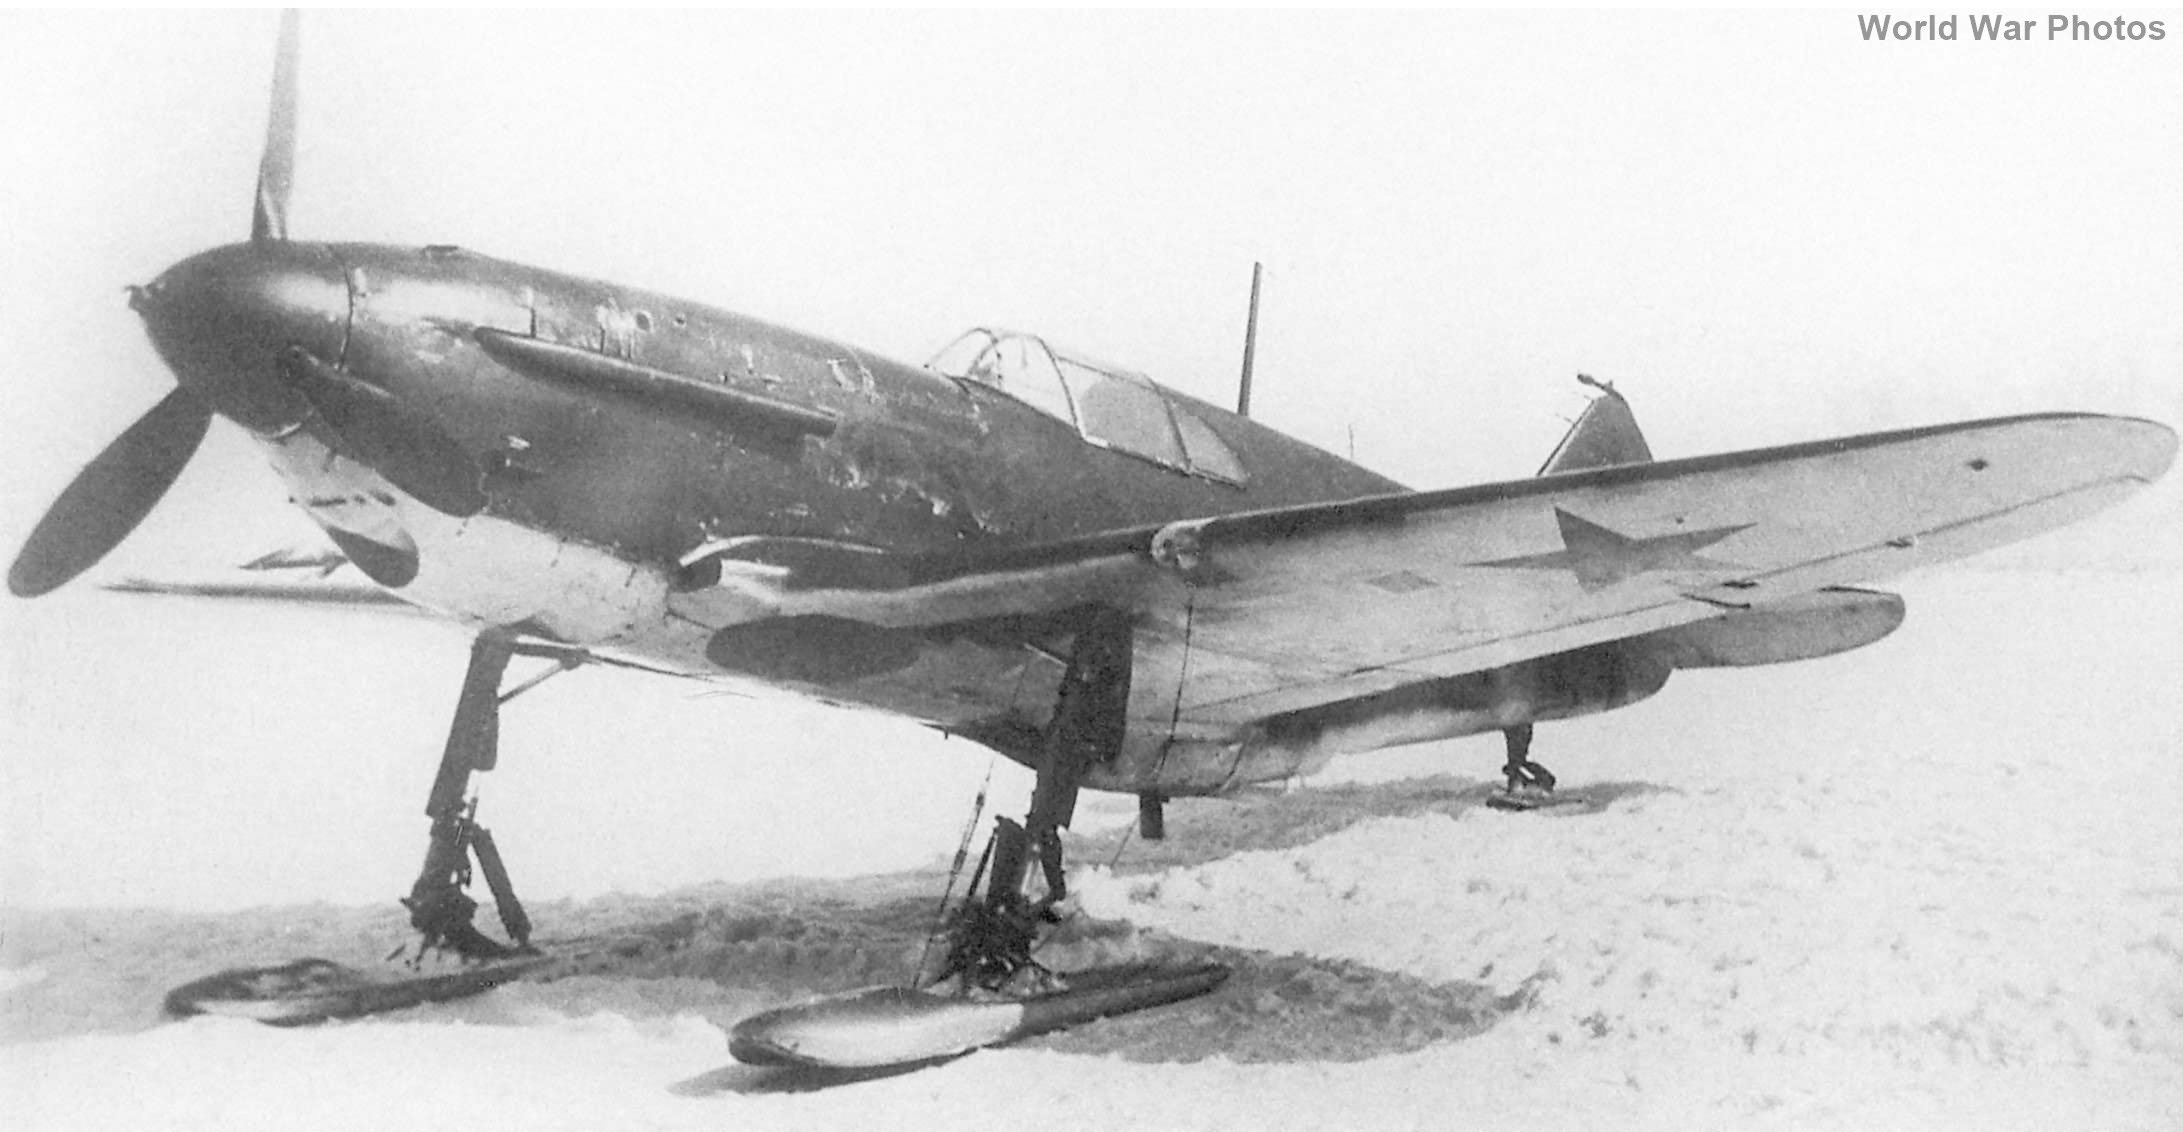 LaGG-3 with ski undercarriage